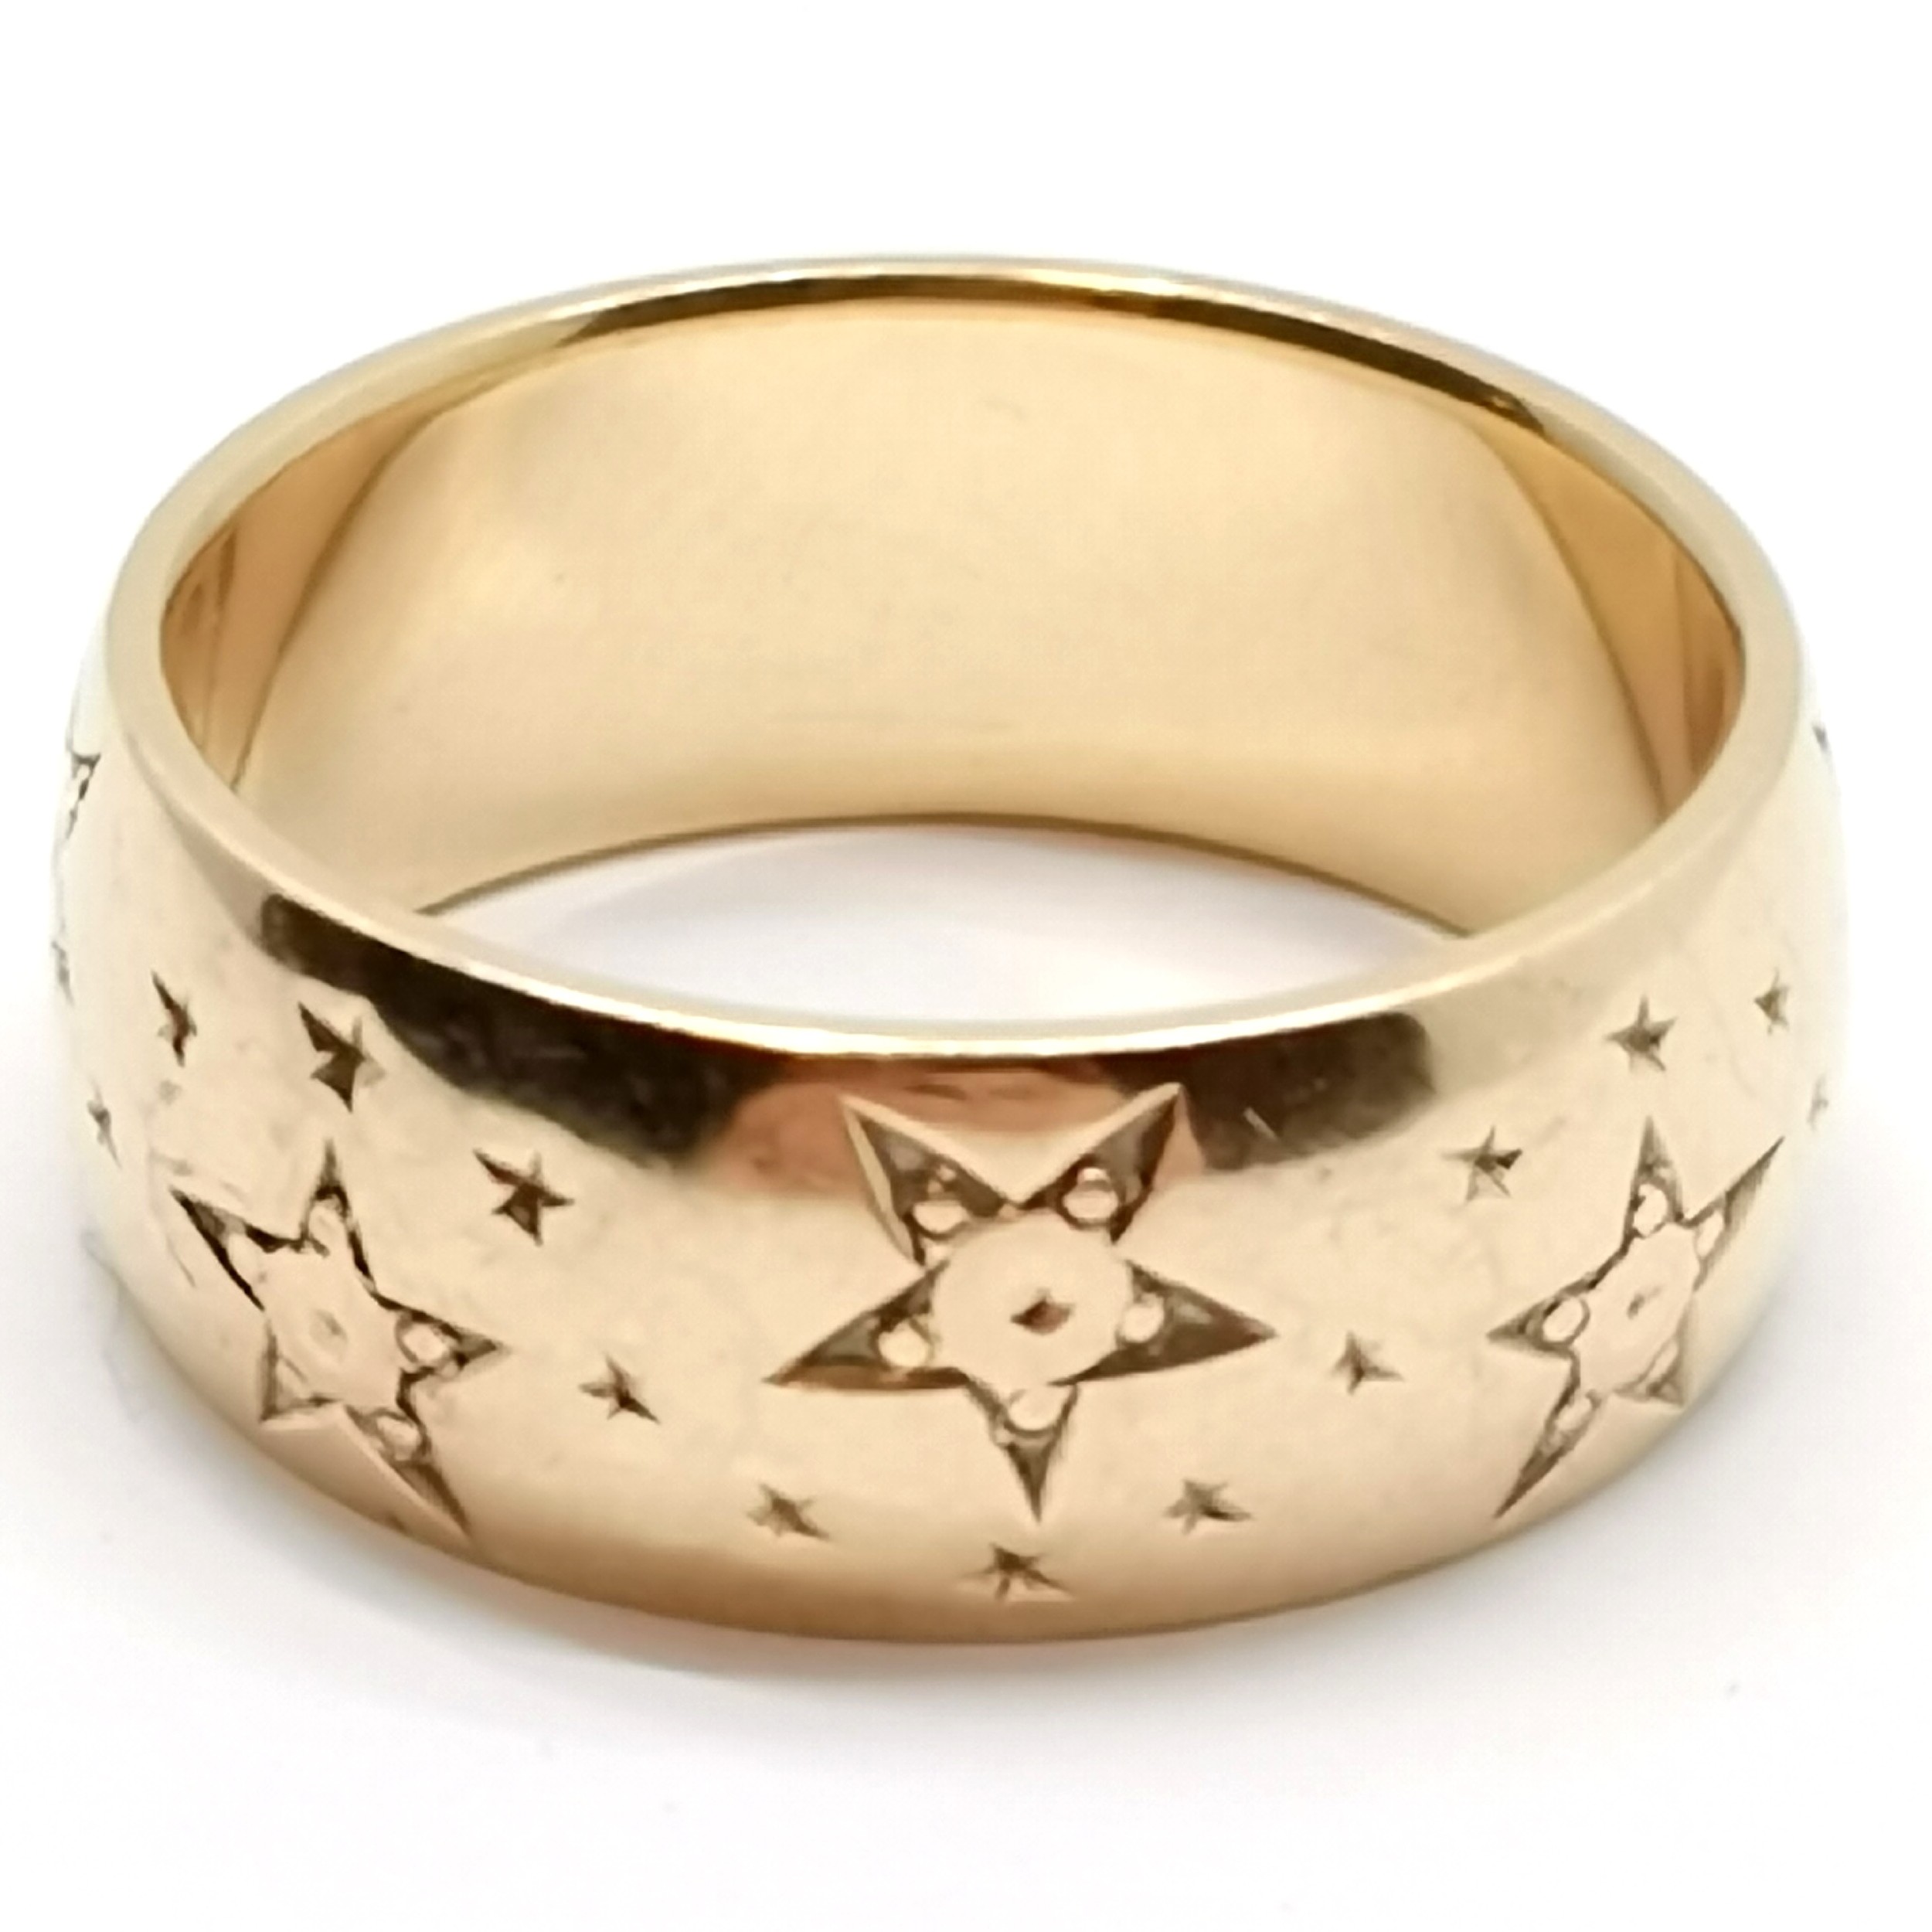 14ct marked gold wide band ring with star detail - size N & 7.2g ~ approx 7mm wide